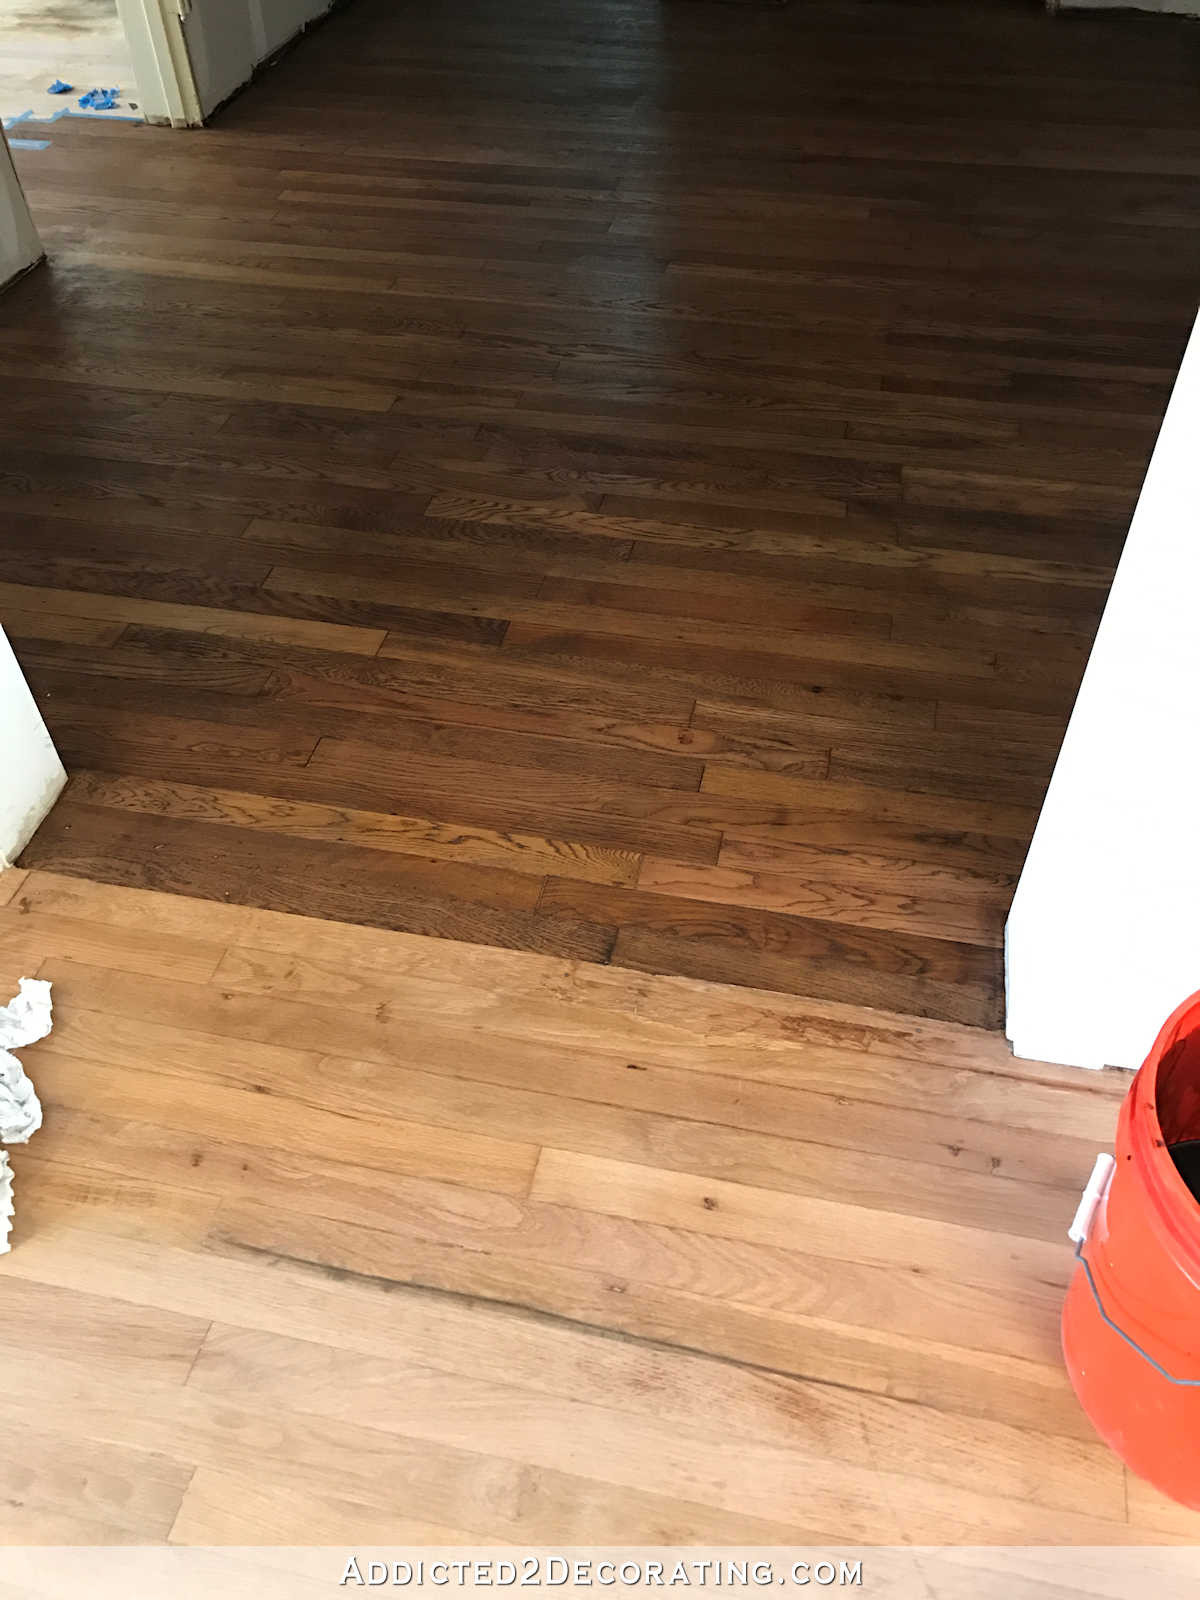 17 Lovable Hardwood Floor Stain Not Drying 2022 free download hardwood floor stain not drying of adventures in staining my red oak hardwood floors products process regarding staining red oak hardwood floors 2 tape off one section at a time for